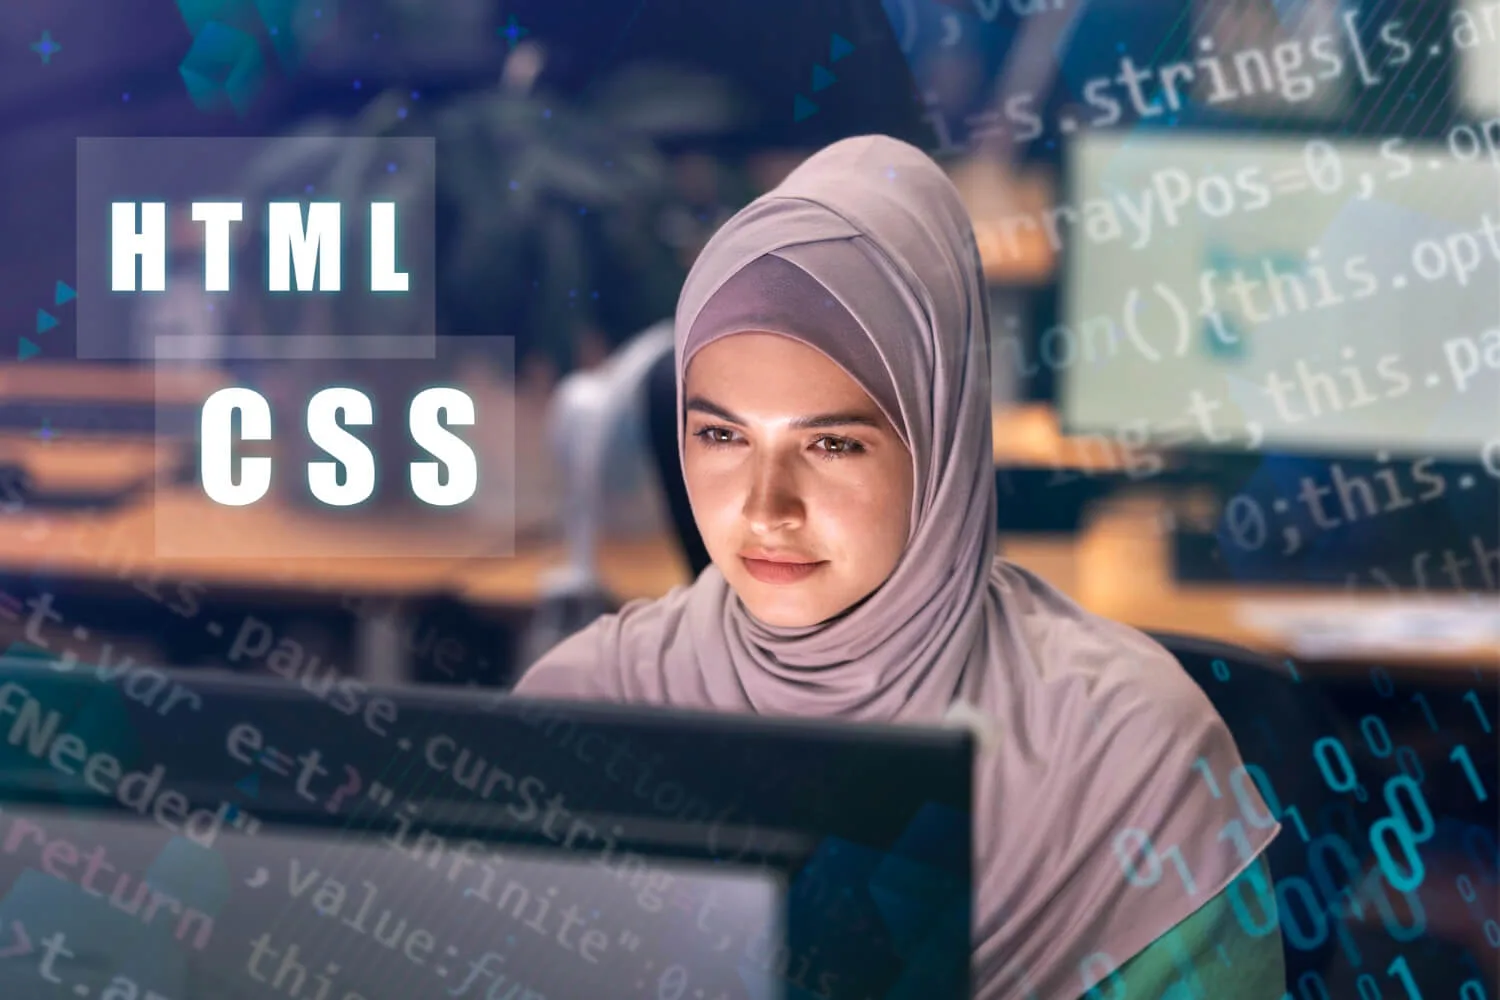 semantic html mistakes being hunted for by a lady in hijab